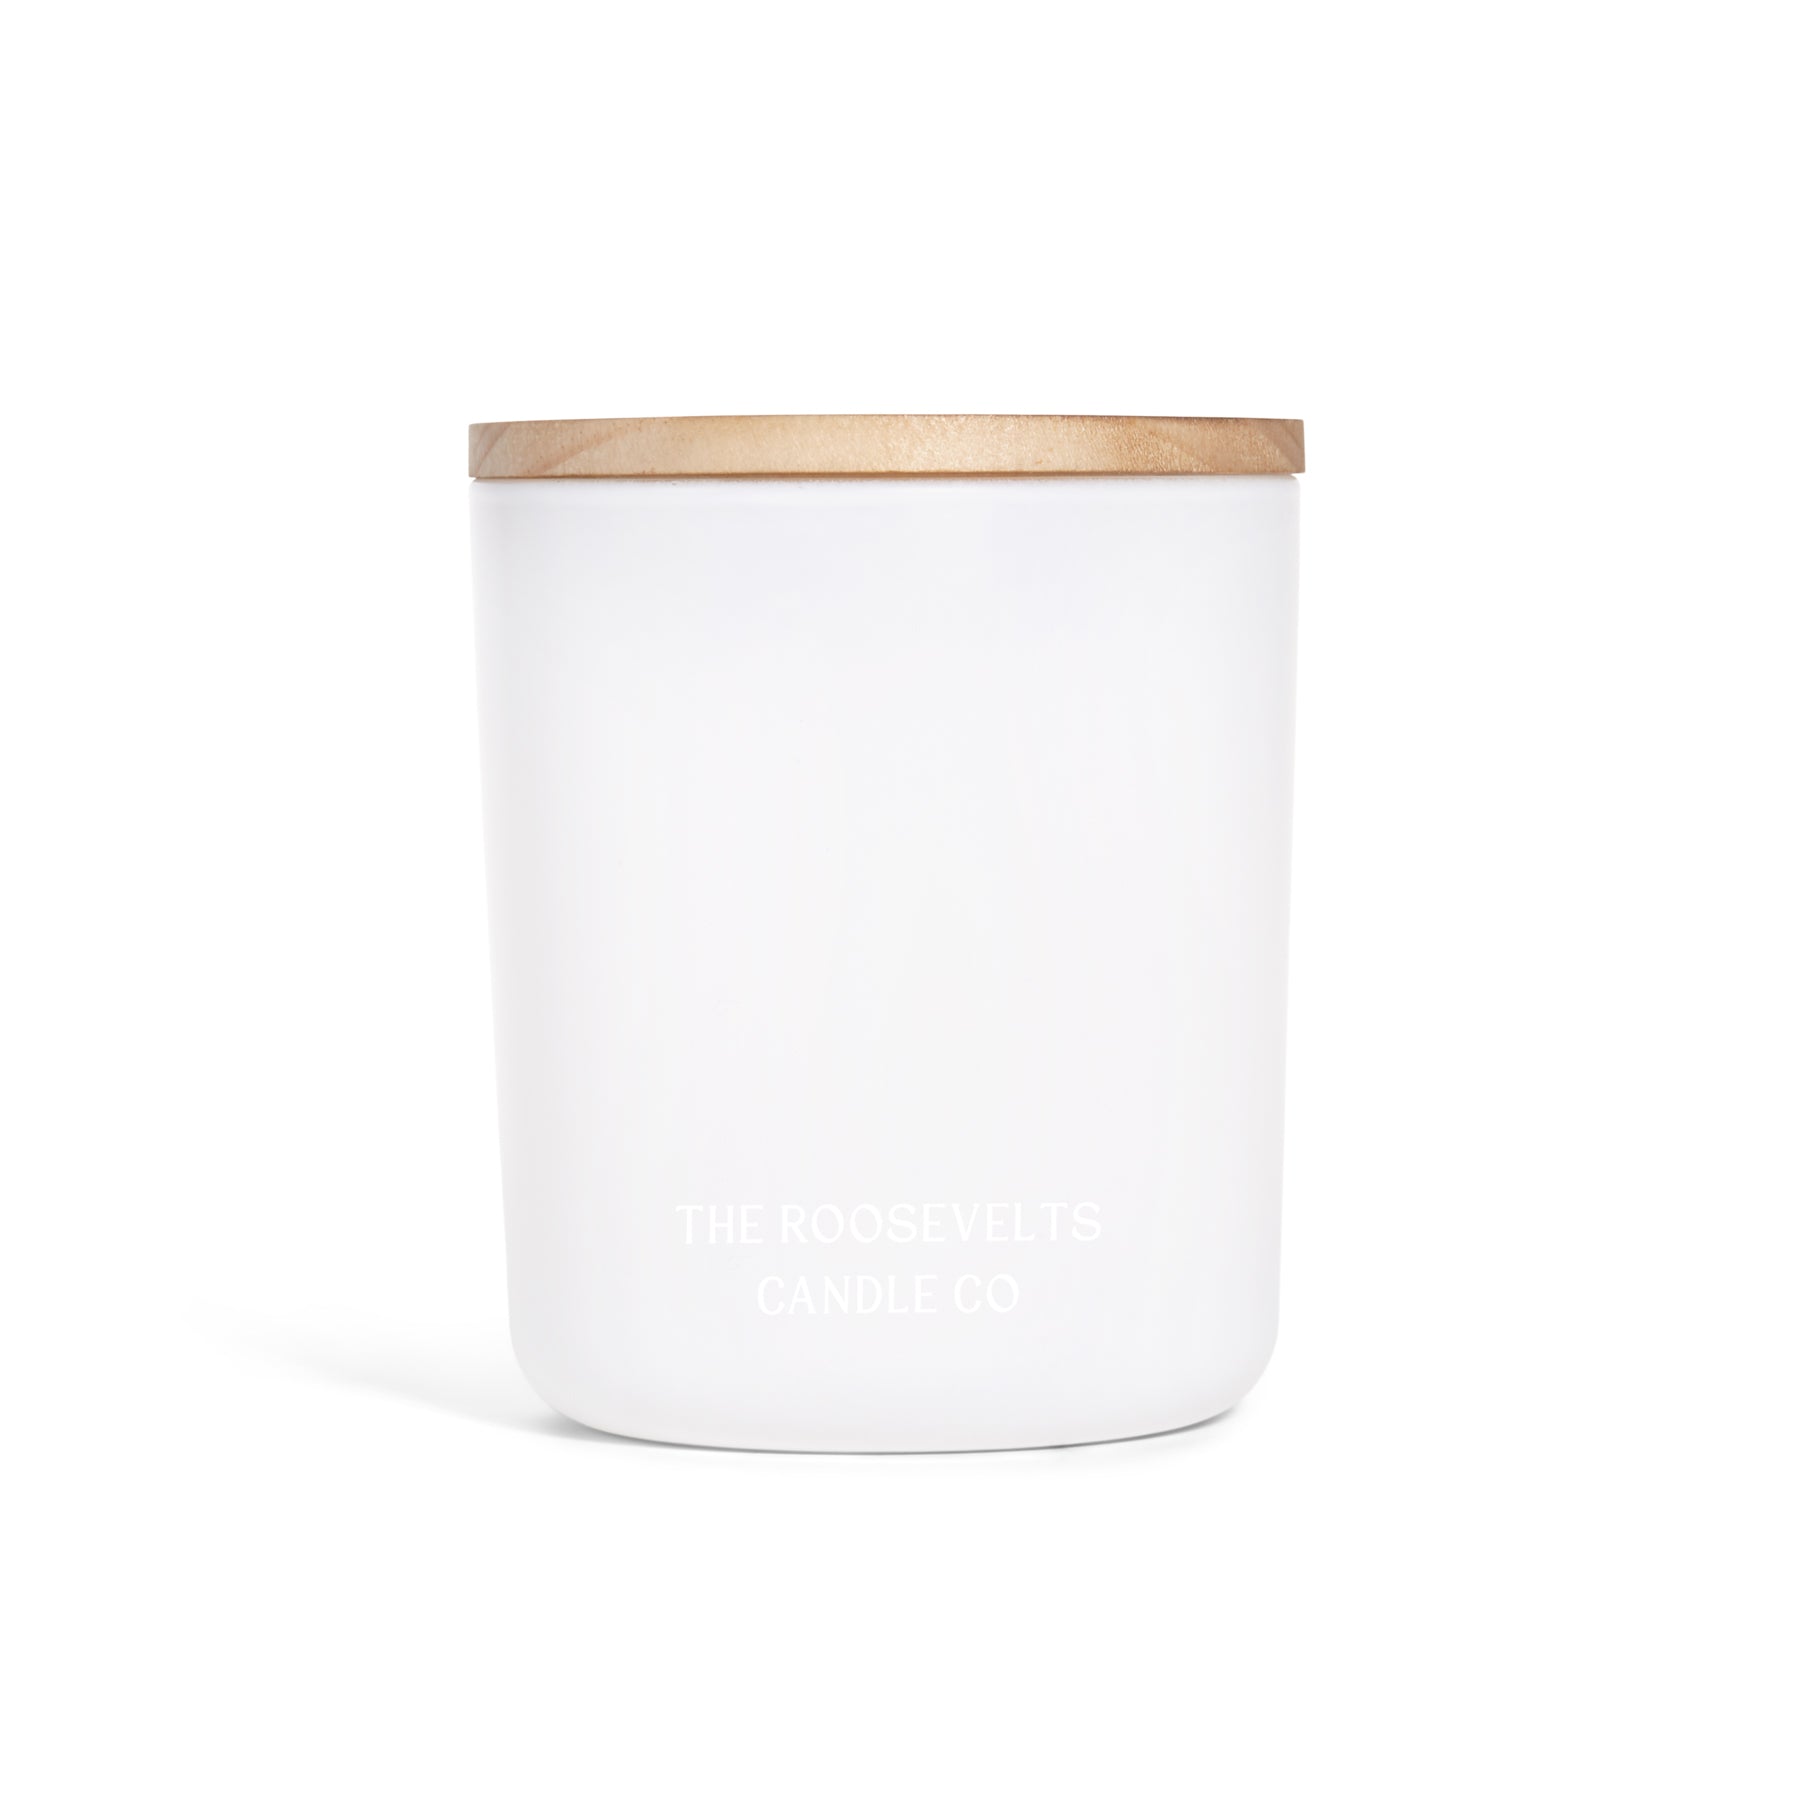 Everglades Candle - The Roosevelts Candle Co.